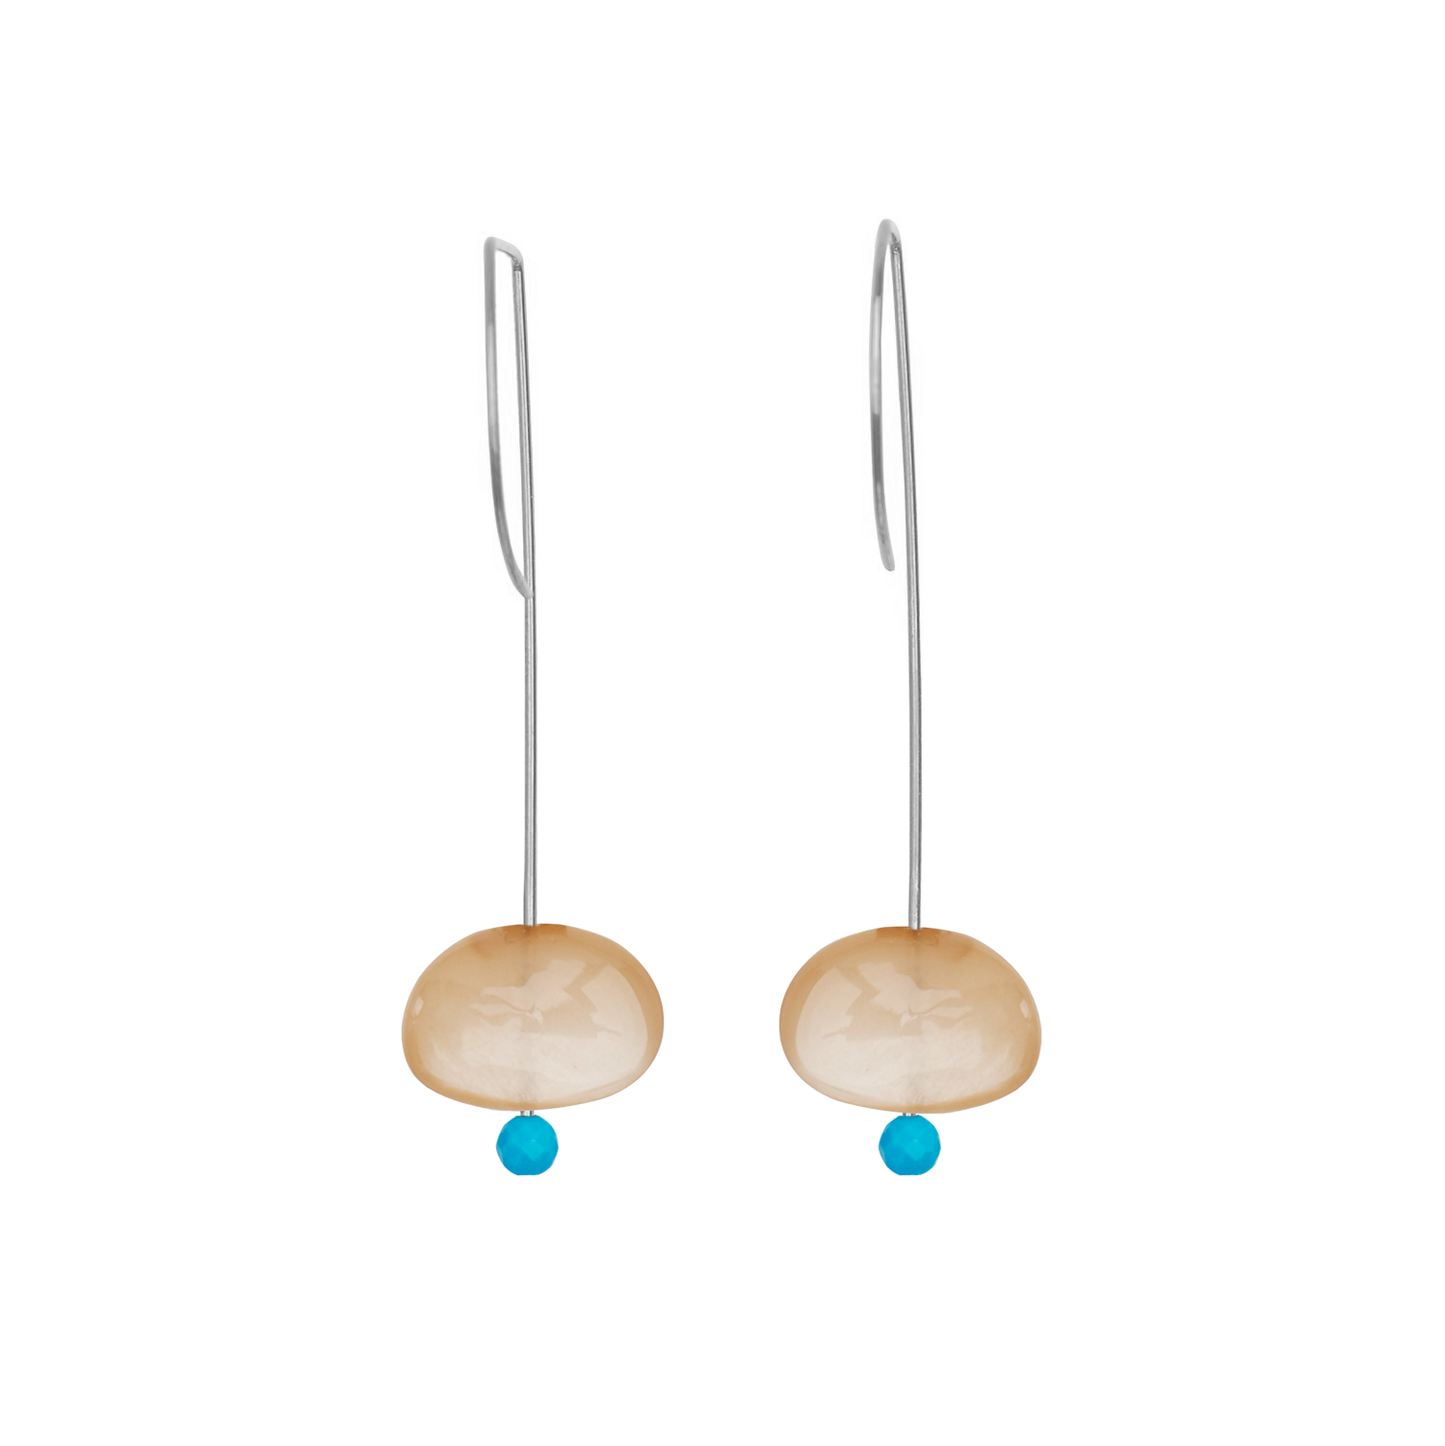 Straight Drop Earrings with Peach Moonstone and Round Beads